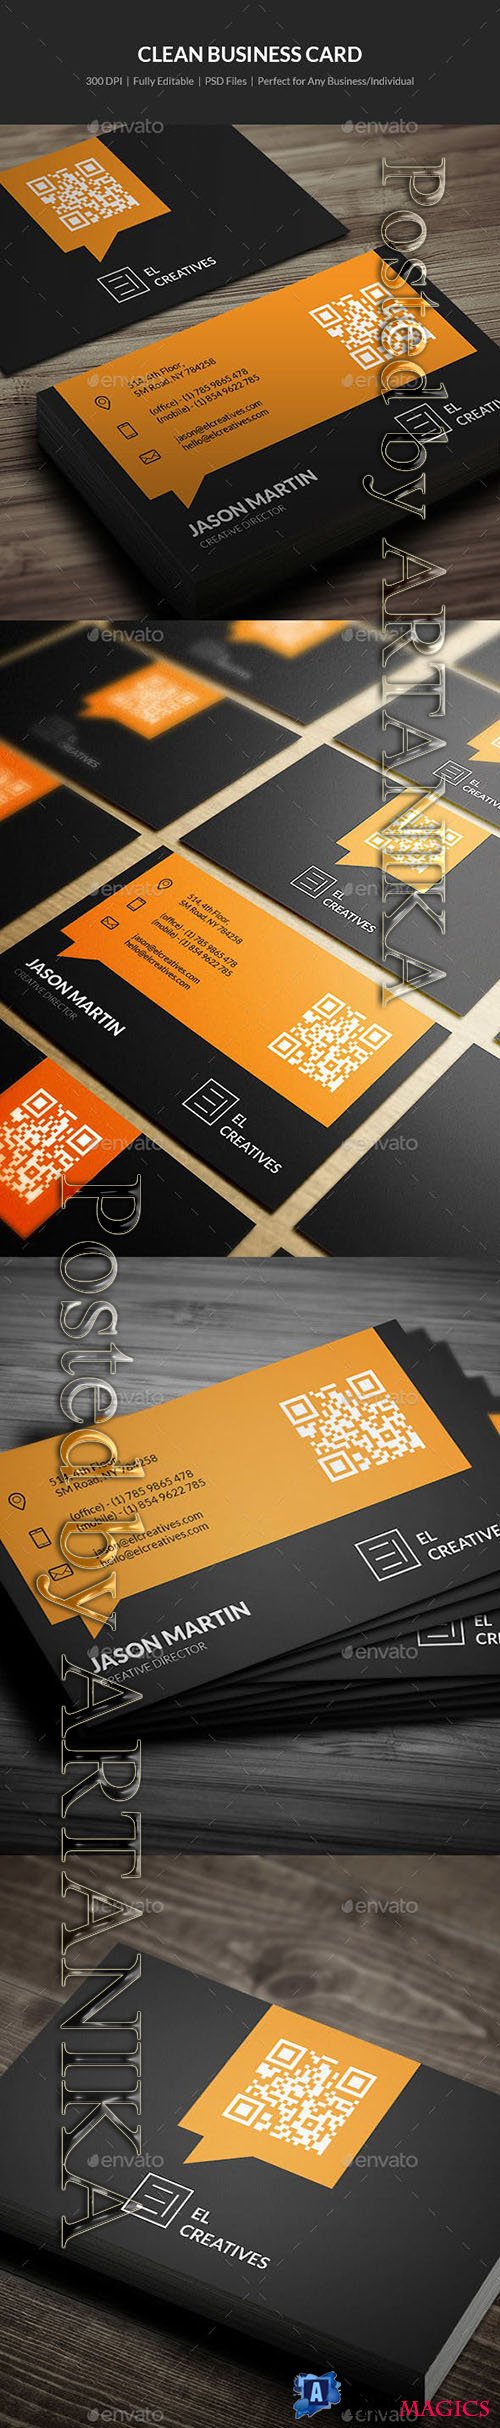 Graphicriver - Clean Business Card - 17 21324654